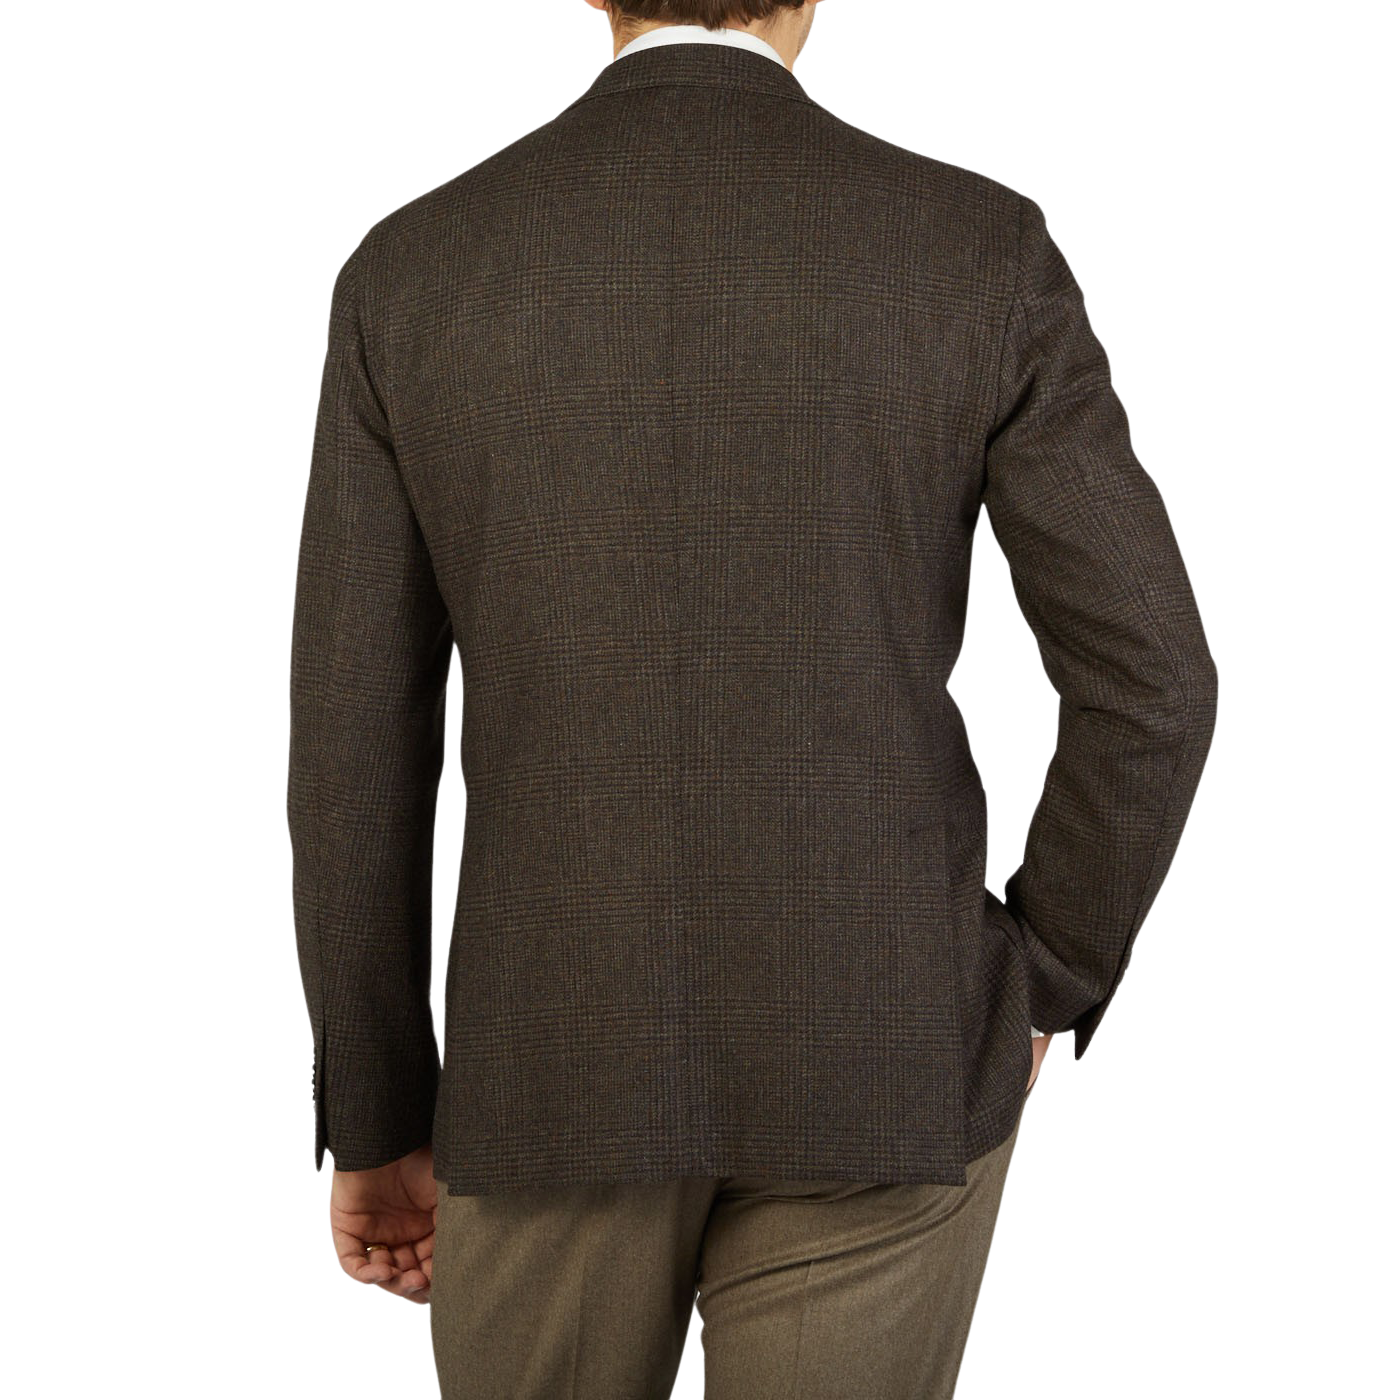 The back view of a man in a Boglioli K Jacket brown blazer, showcasing its unstructured craftsmanship and elegant made in Italy design.